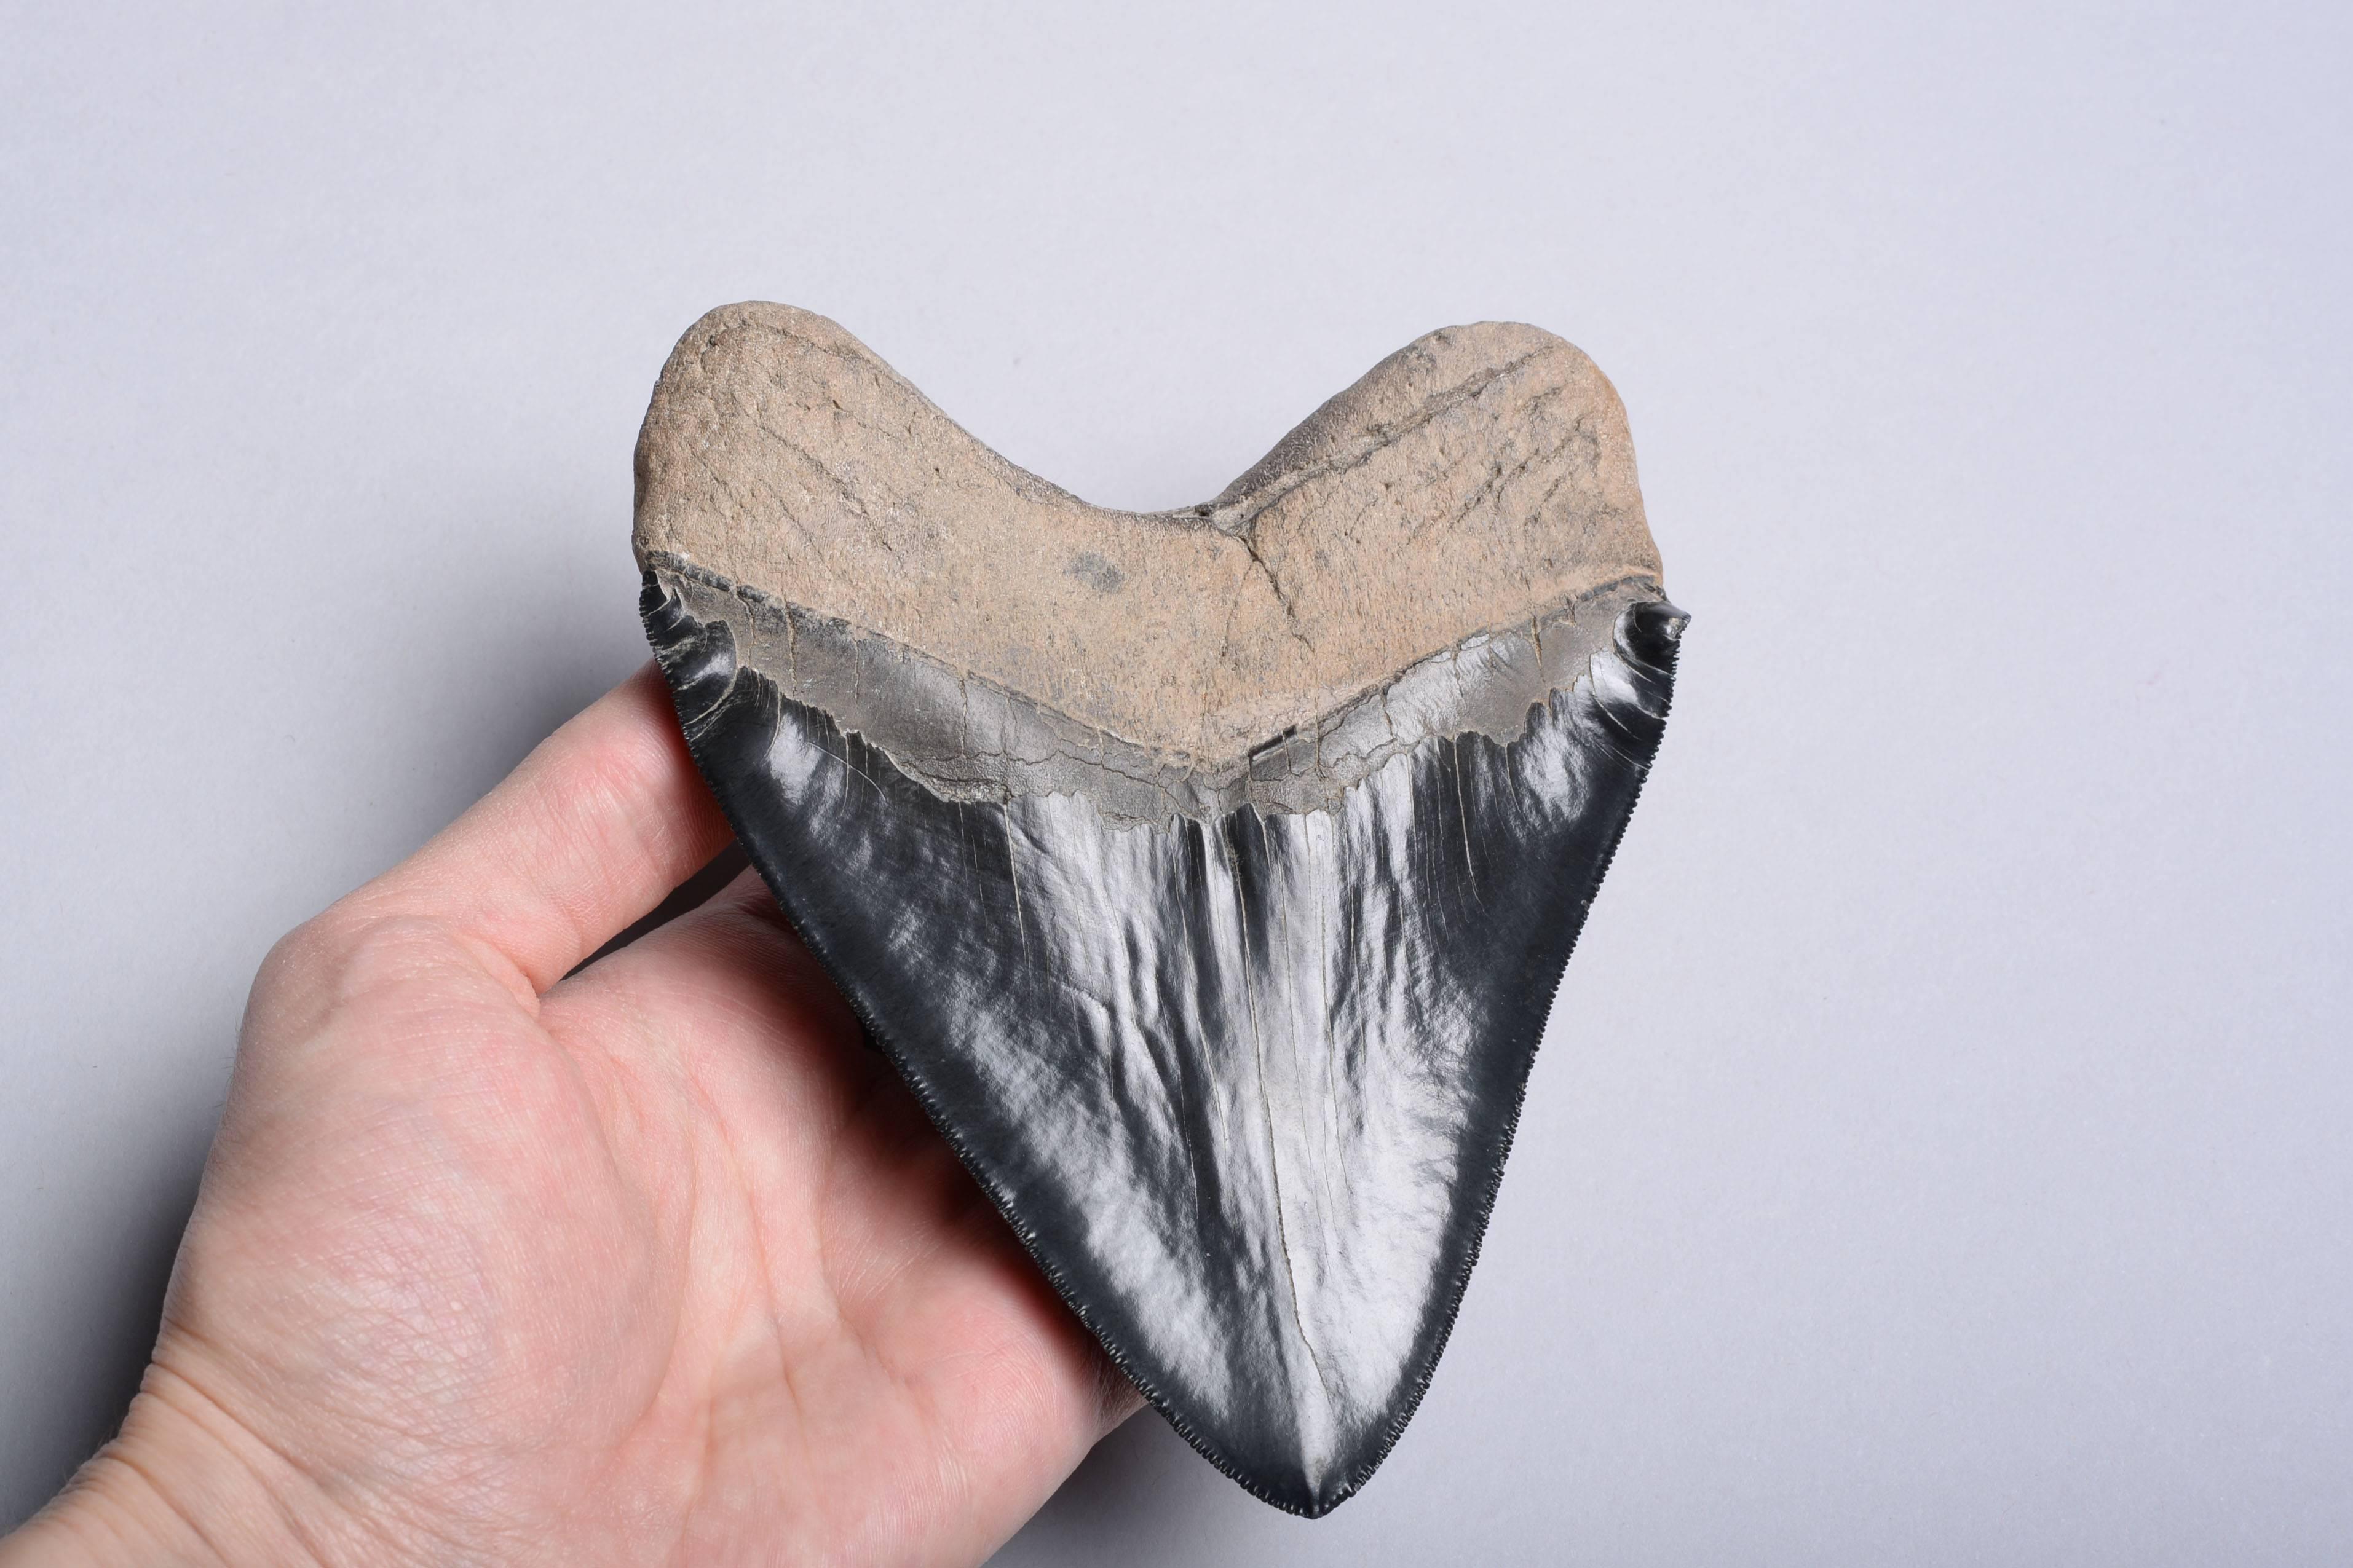 American Huge Prehistoric Megalodon Tooth Fossil